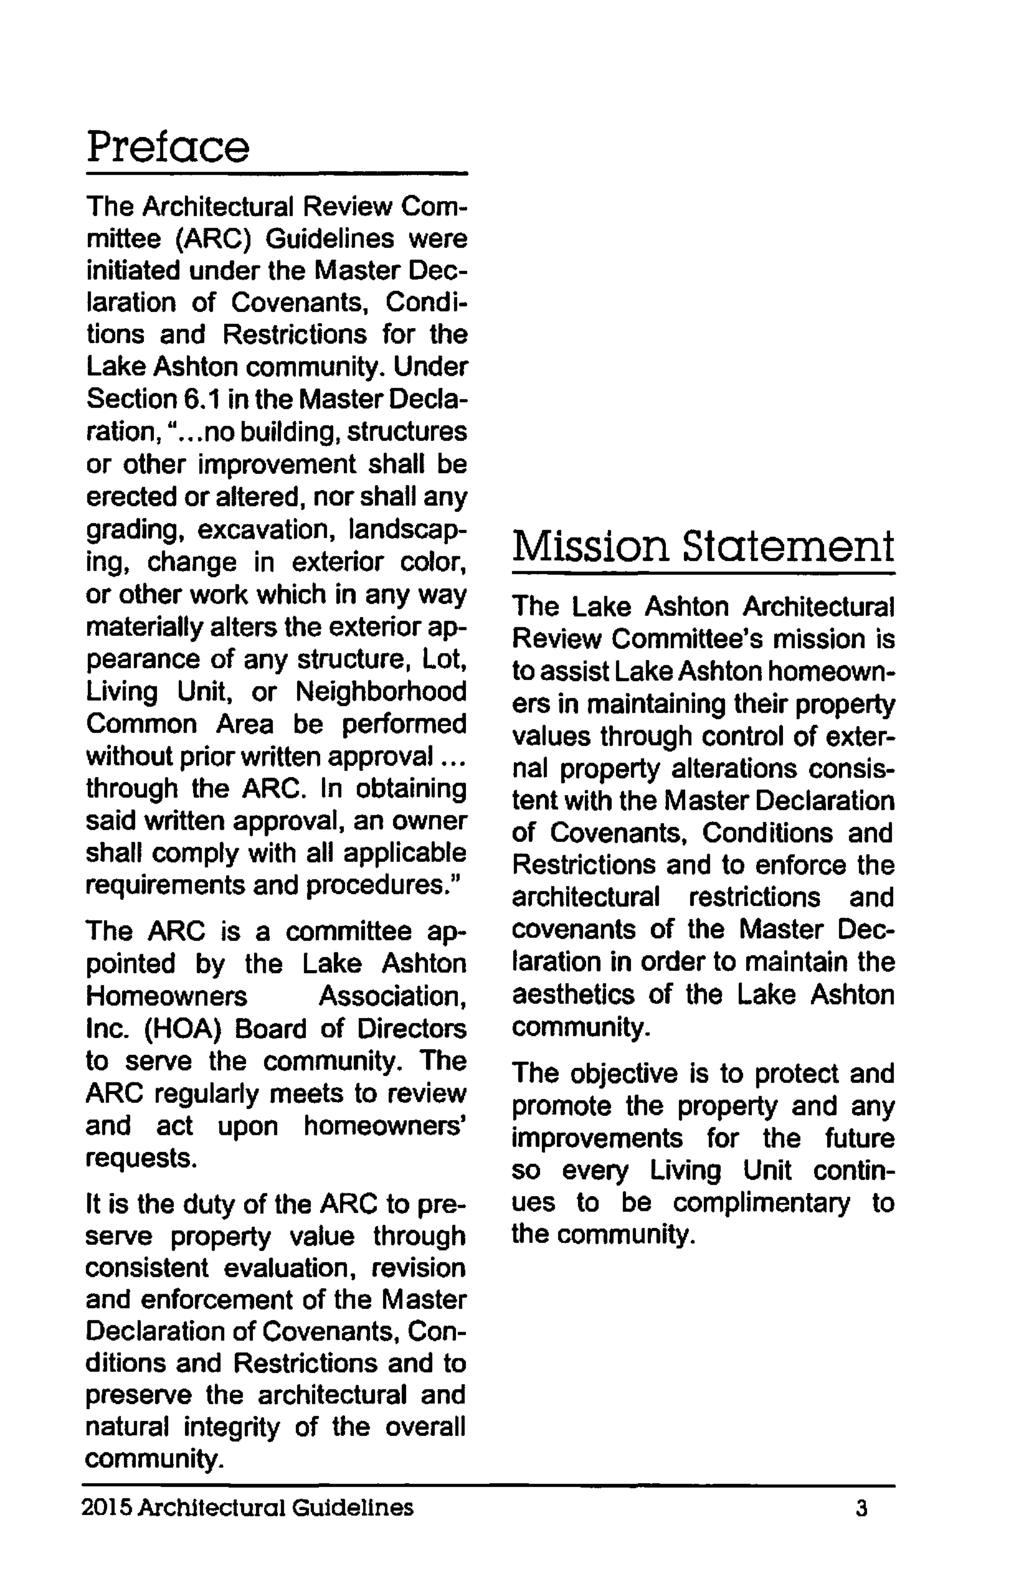 Preface The Architectural Review Committee (ARC) Guidelines were initiated under the Master Declaration of Covenants, Conditions and Restrictions for the Lake Ashton community. Under Section 6.